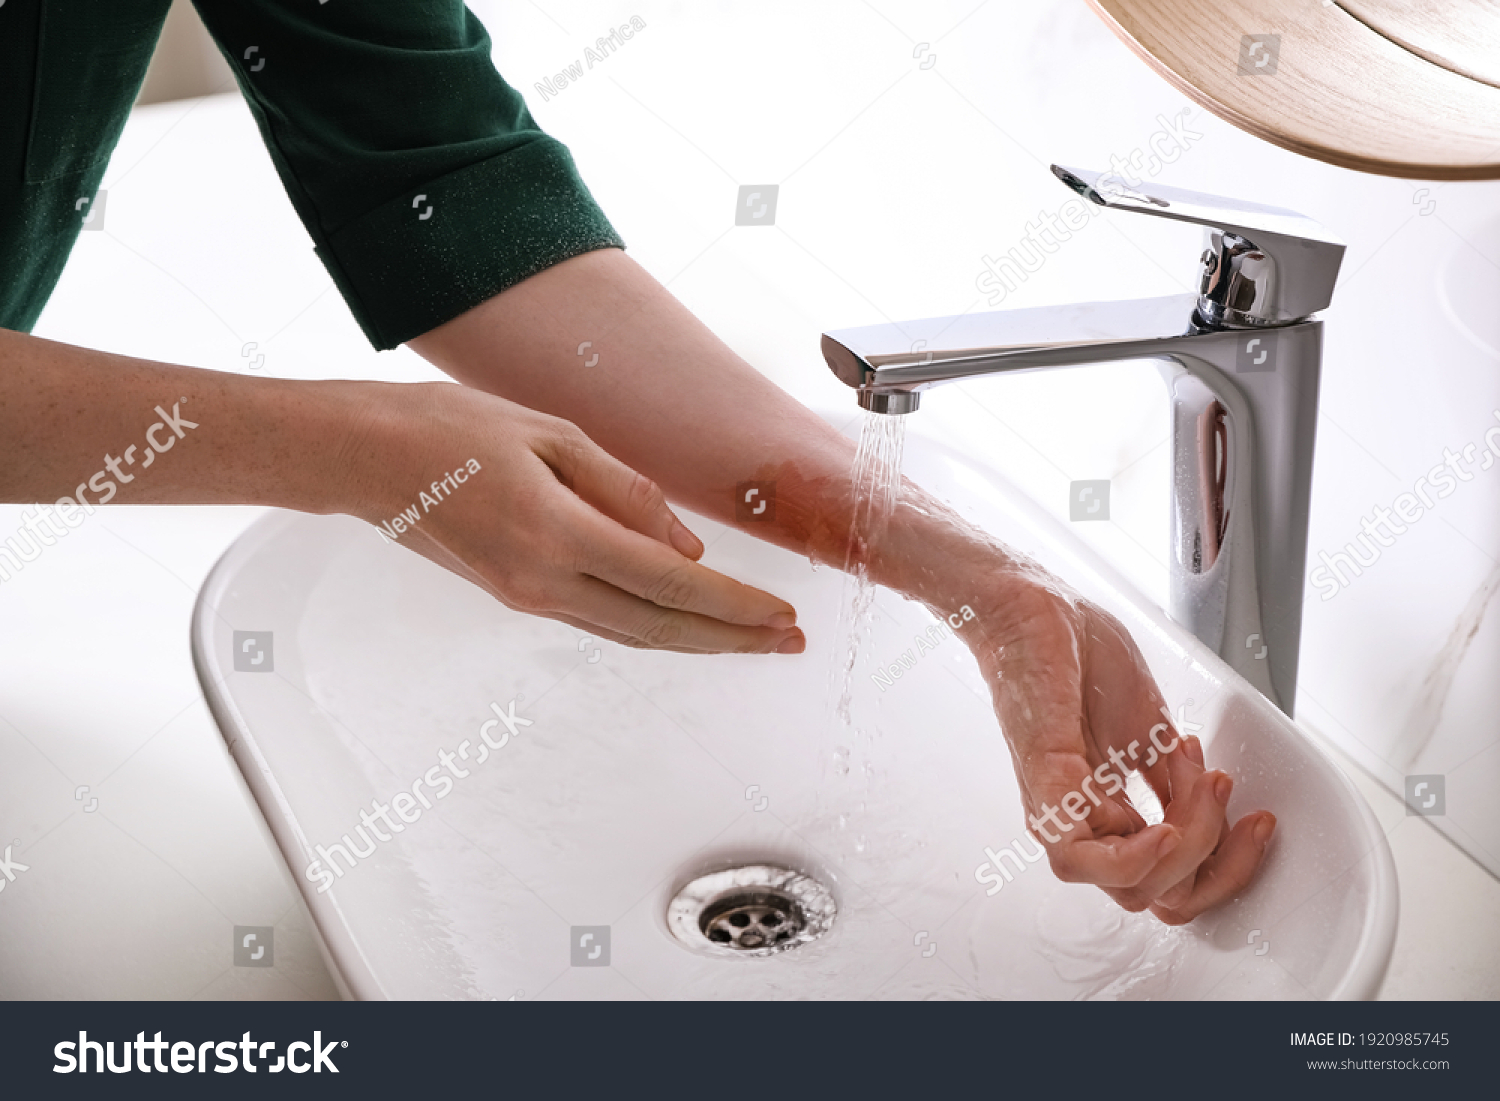 Woman putting burned hand under running cold water indoors, closeup #1920985745